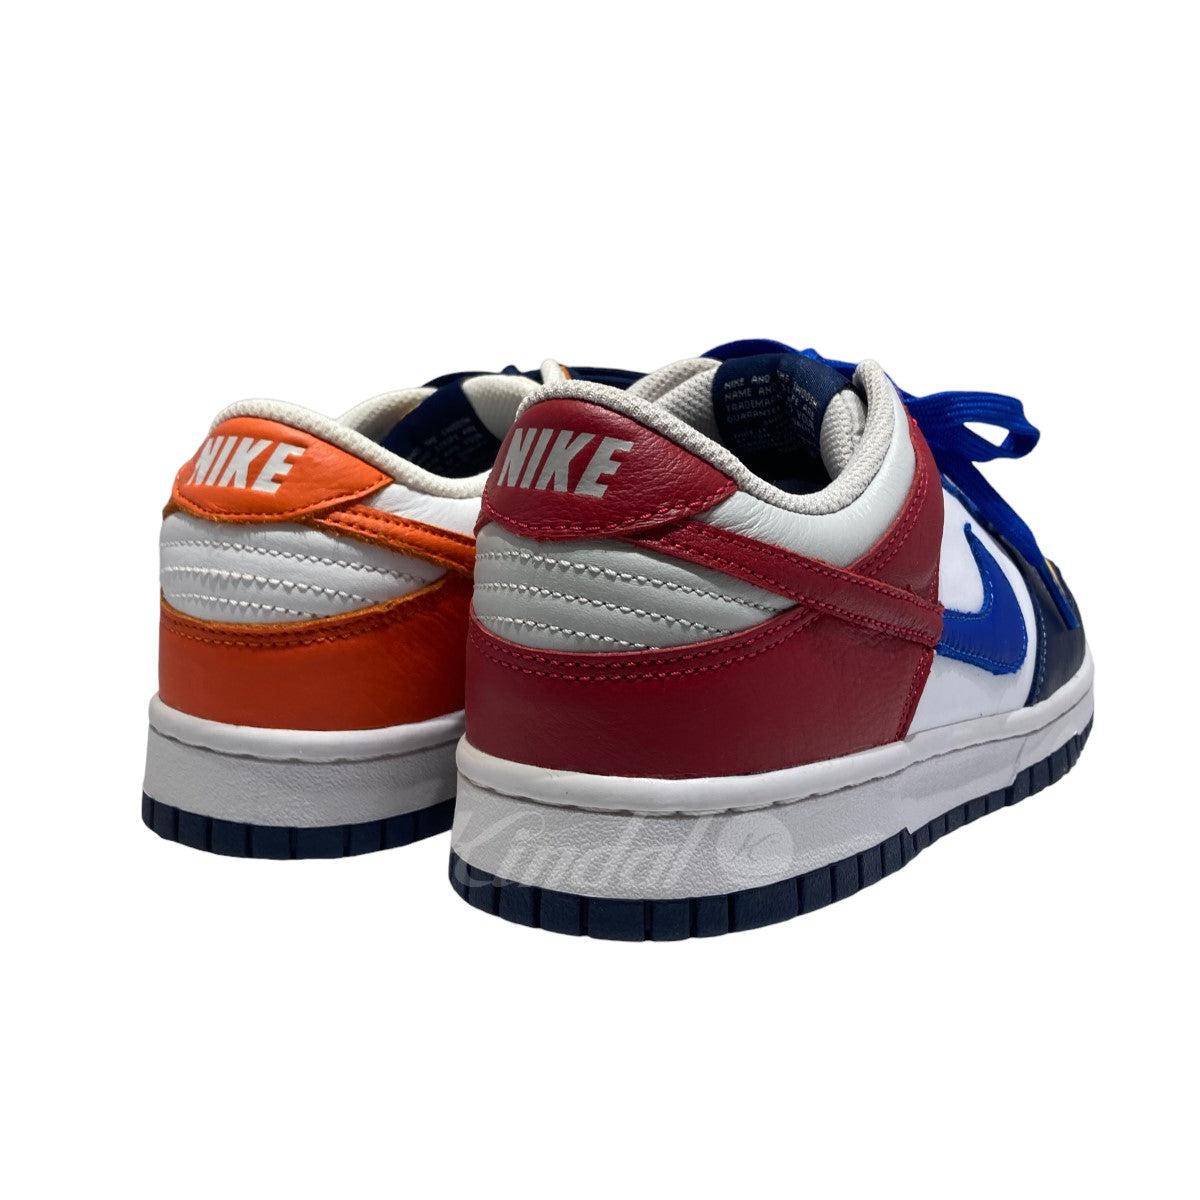 NIKE(ナイキ) DUNK LOW JP QS WHAT THE ダンク ロー JP／aa4414-400 ...